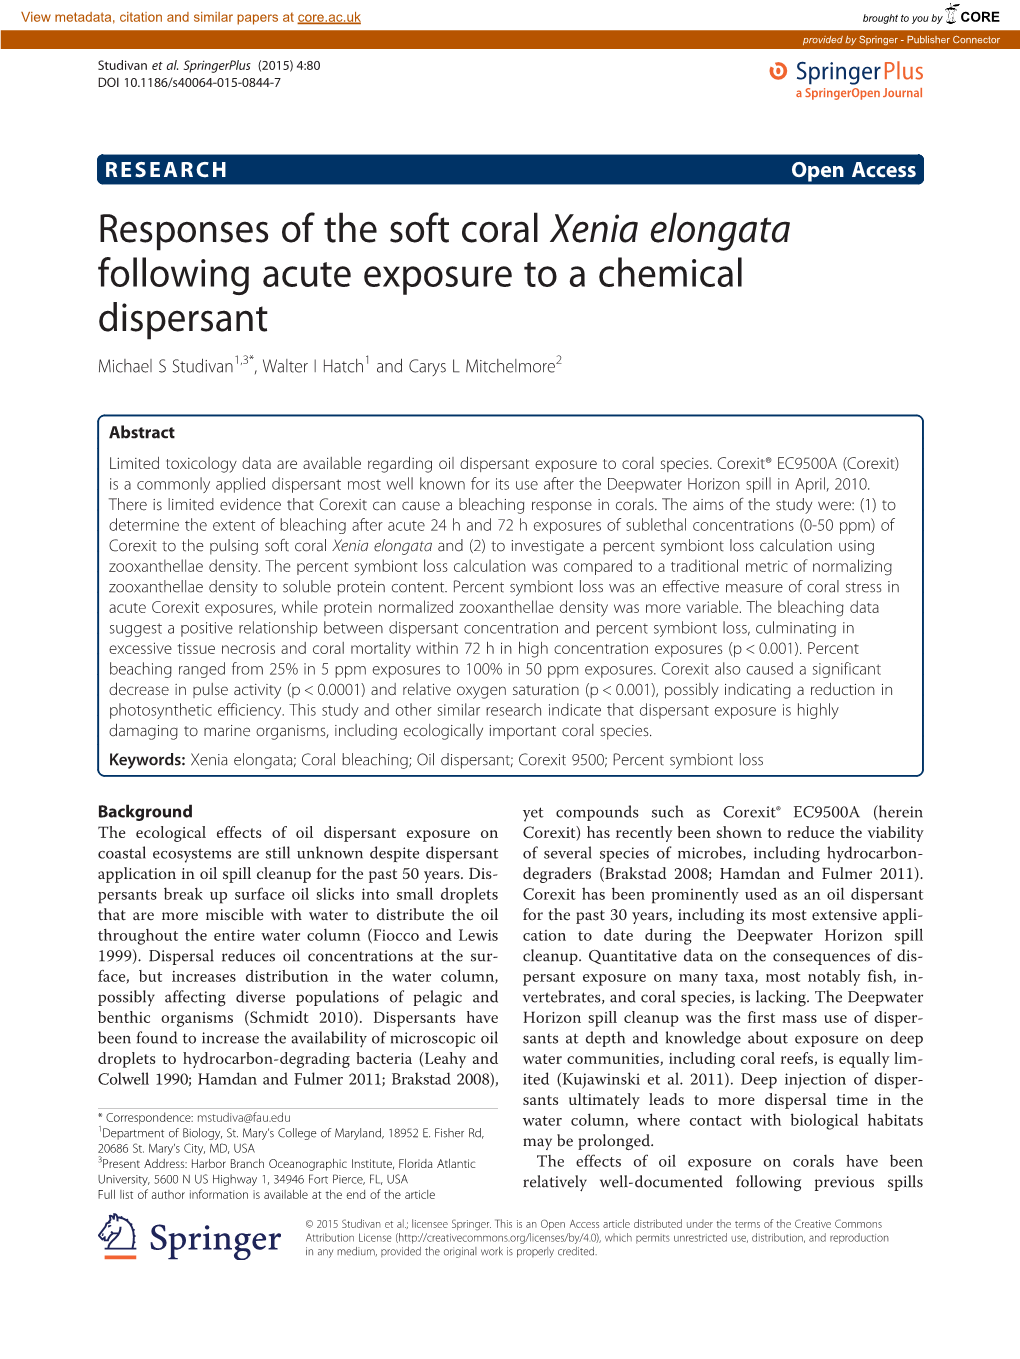 Responses of the Soft Coral Xenia Elongata Following Acute Exposure to a Chemical Dispersant Michael S Studivan1,3*, Walter I Hatch1 and Carys L Mitchelmore2